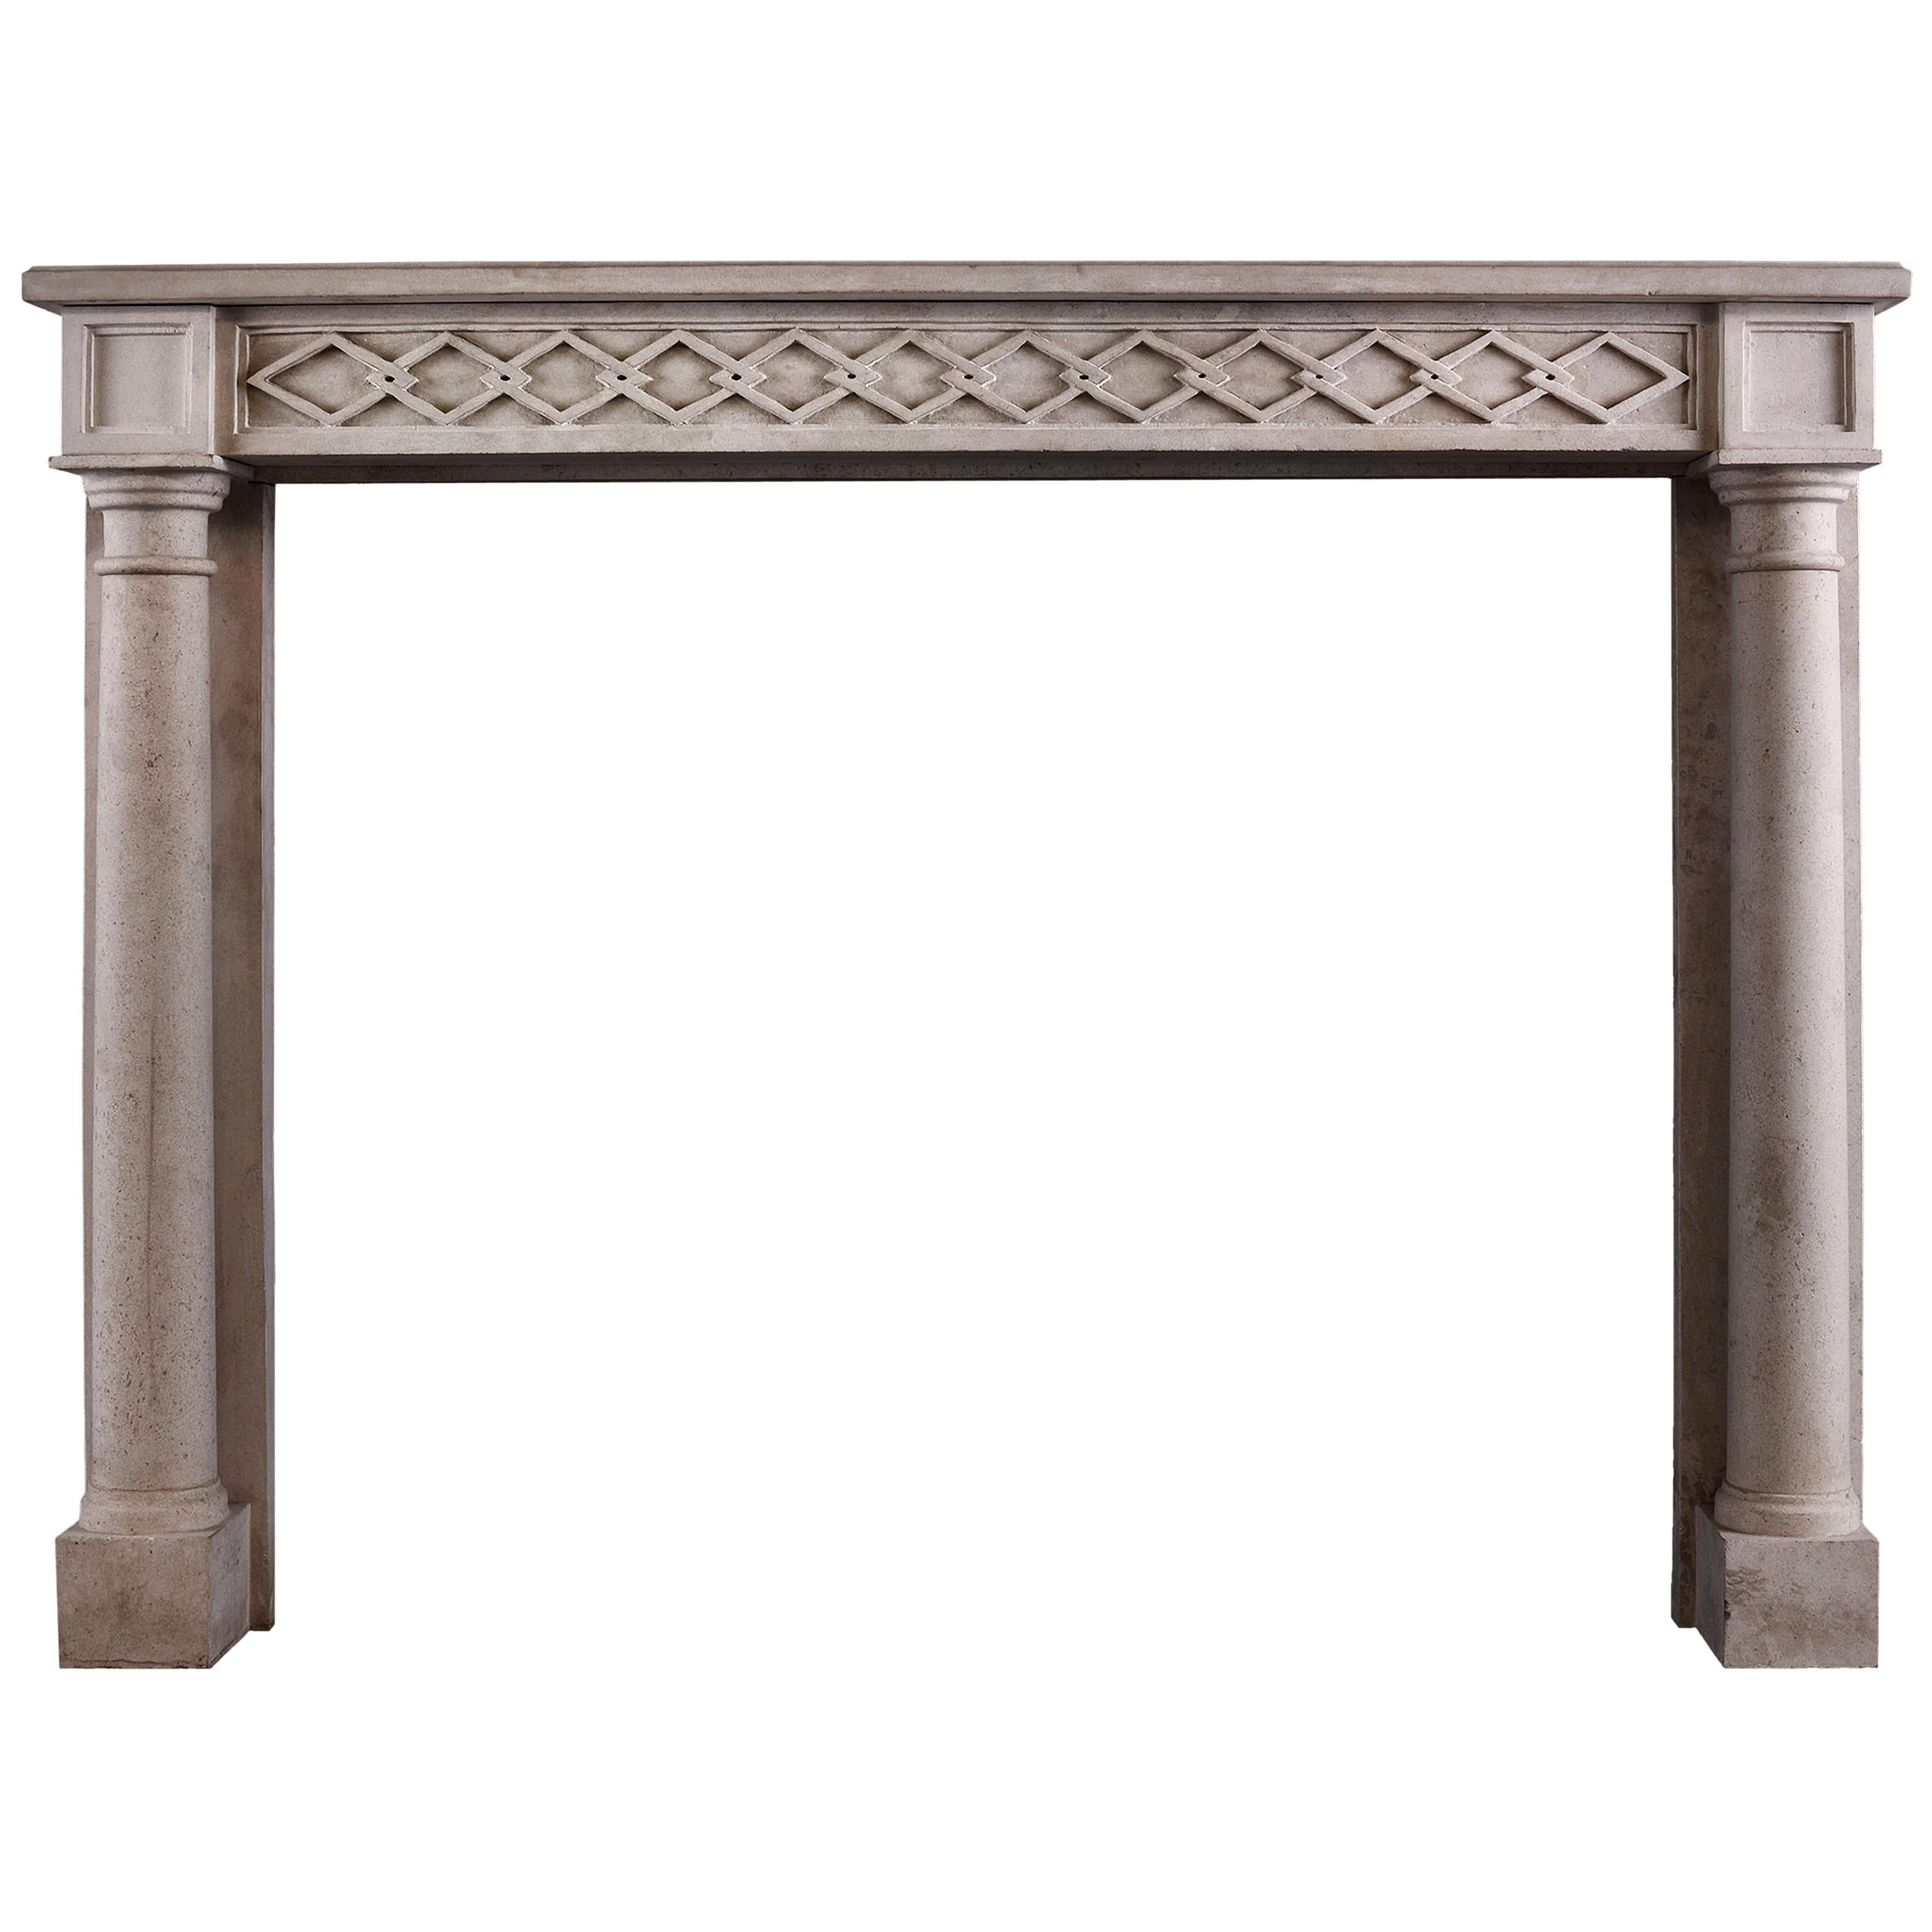 French Empire Style Limestone Fireplace For Sale